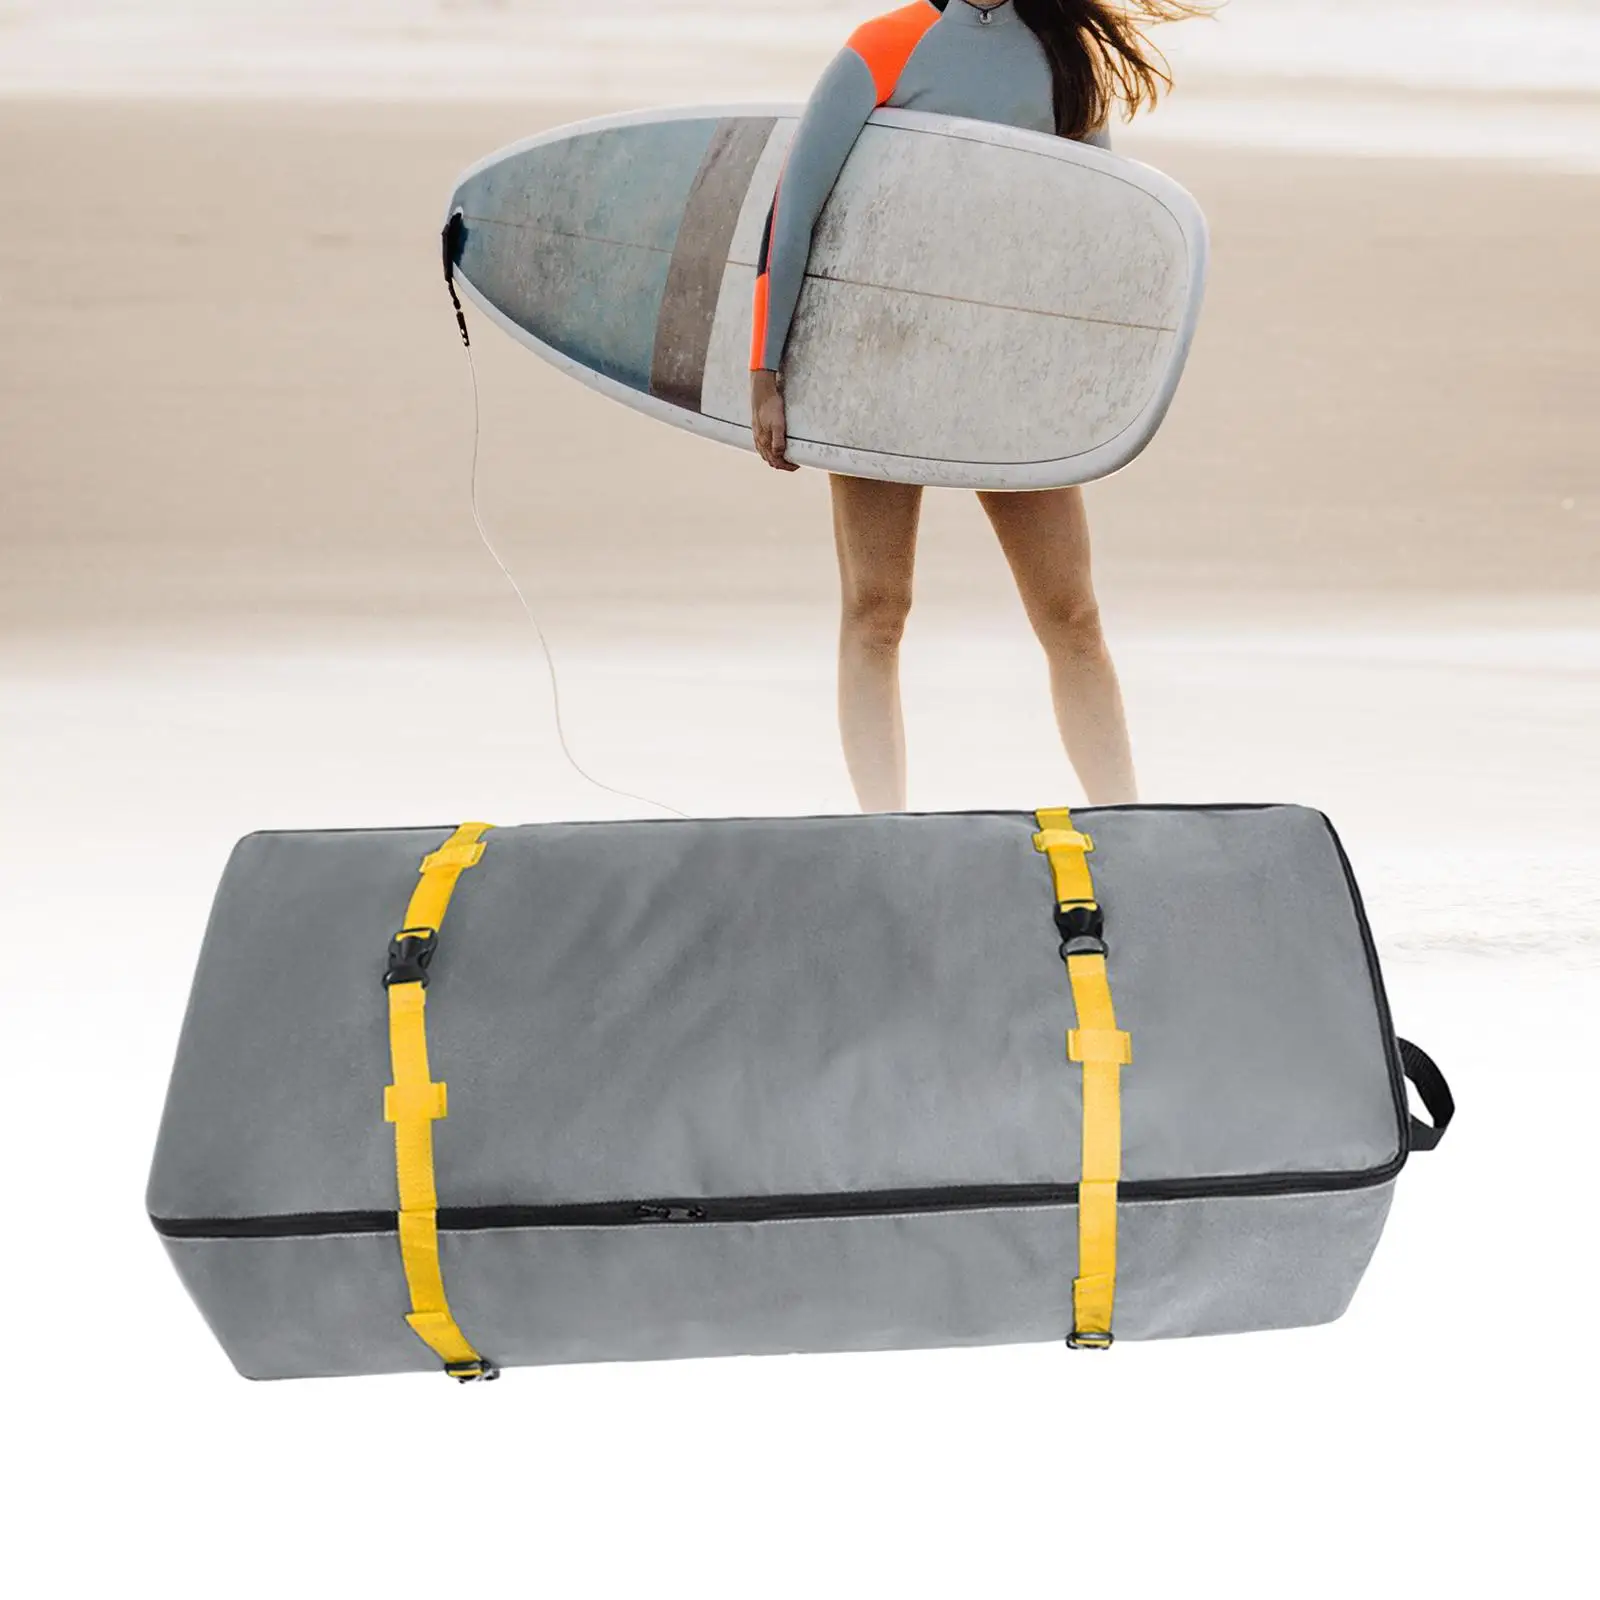 Paddle Board Backpack Thick Land Surfboard Bag for Outdoor Kayaking Boating